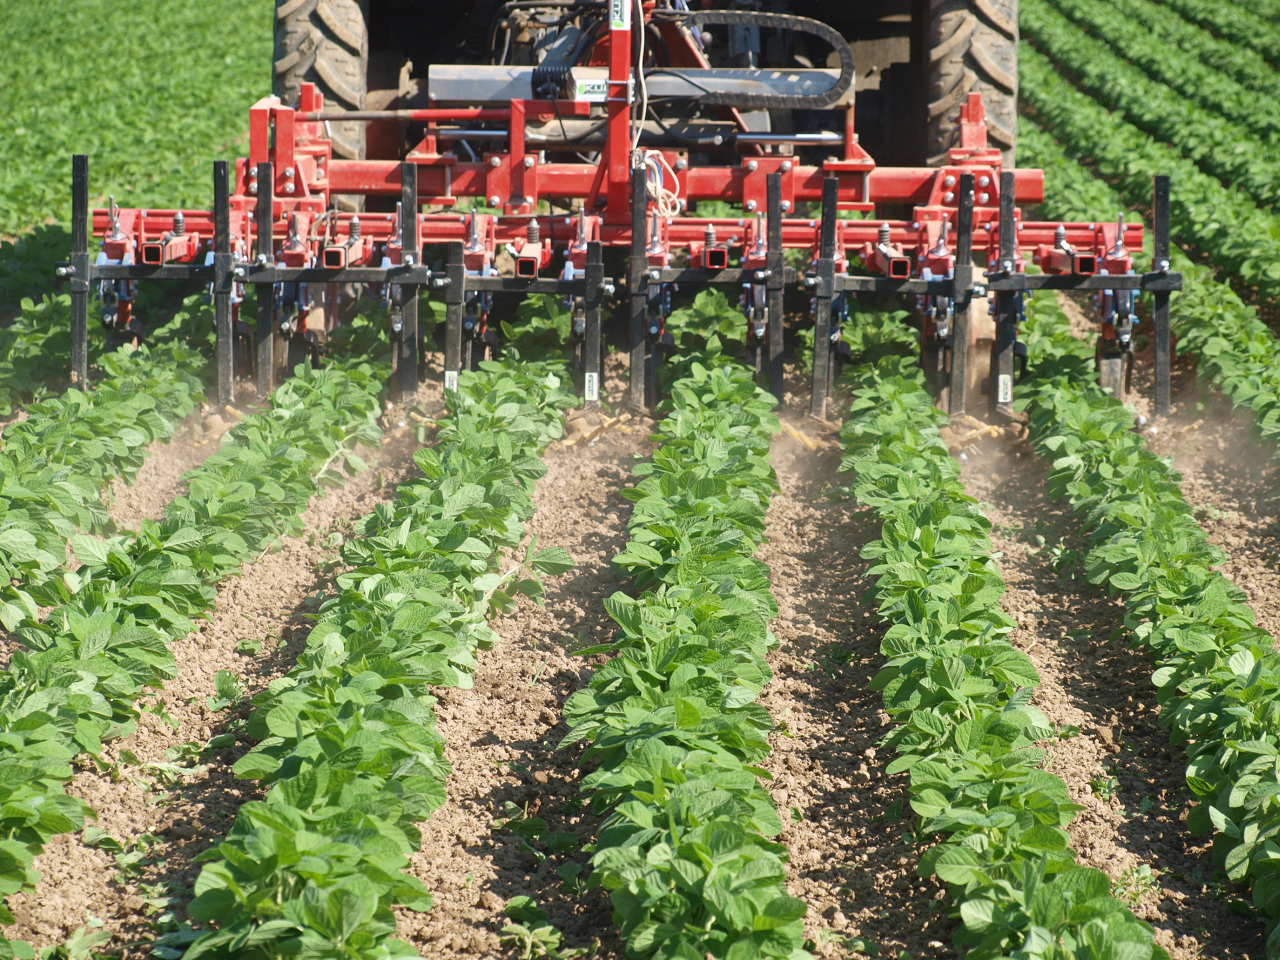 A tractor with attached black hoe driving through soybean plants